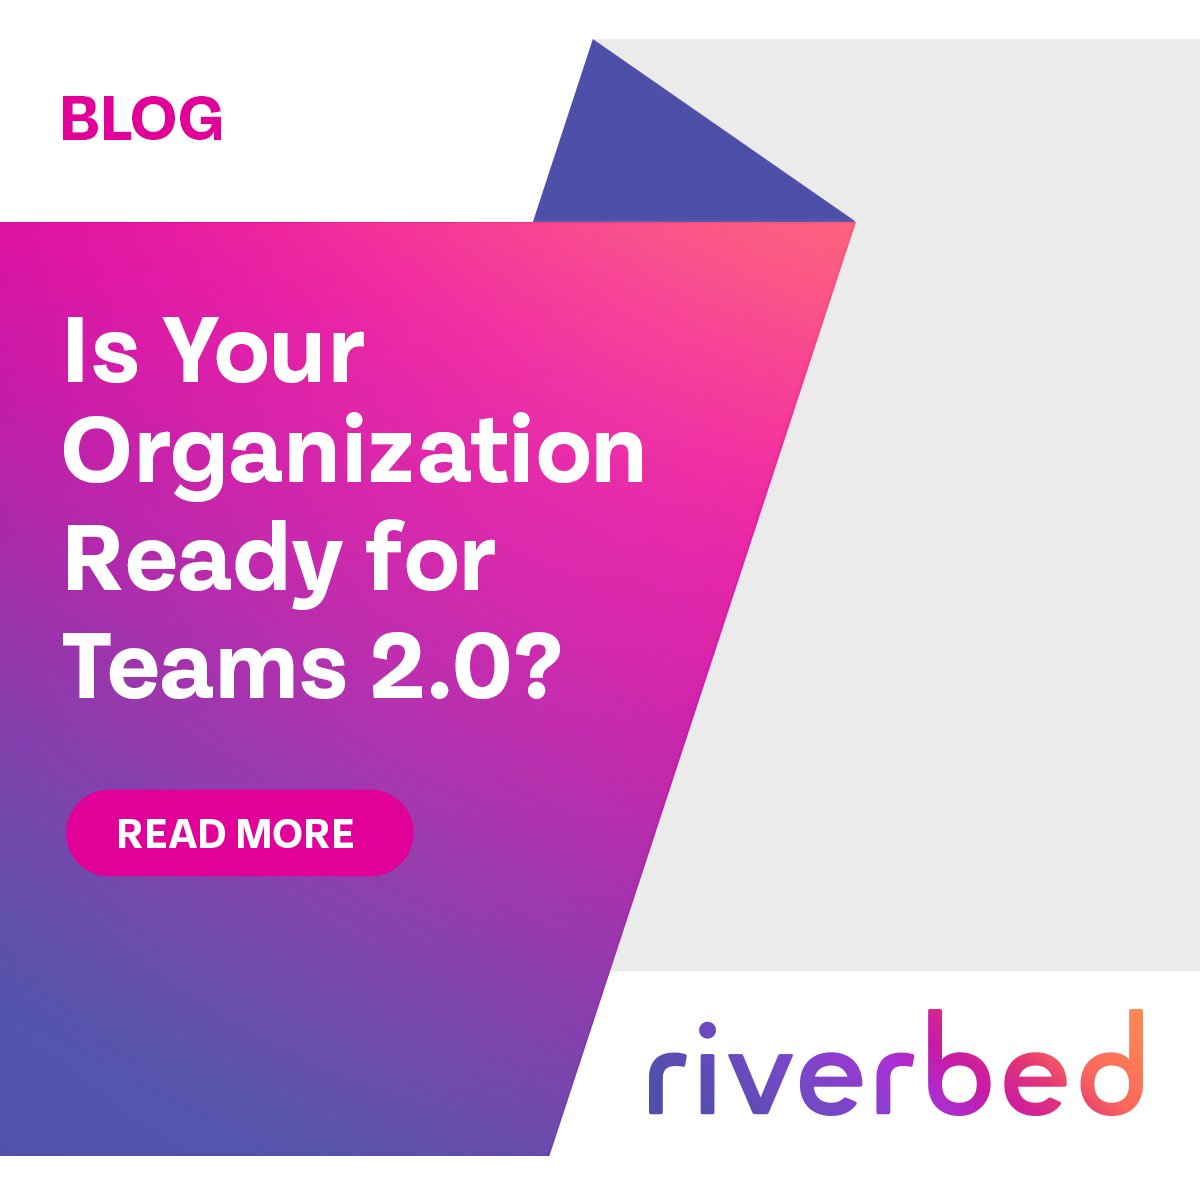 Is your organization making the switch to MS Teams 2.0? 💻 Check out our latest blog to read exactly how we leveraged our own solution, Riverbed Aternity, to successfully migrate with fewer service tickets and high employee satisfaction! Details: rvbd.ly/3JynB7i